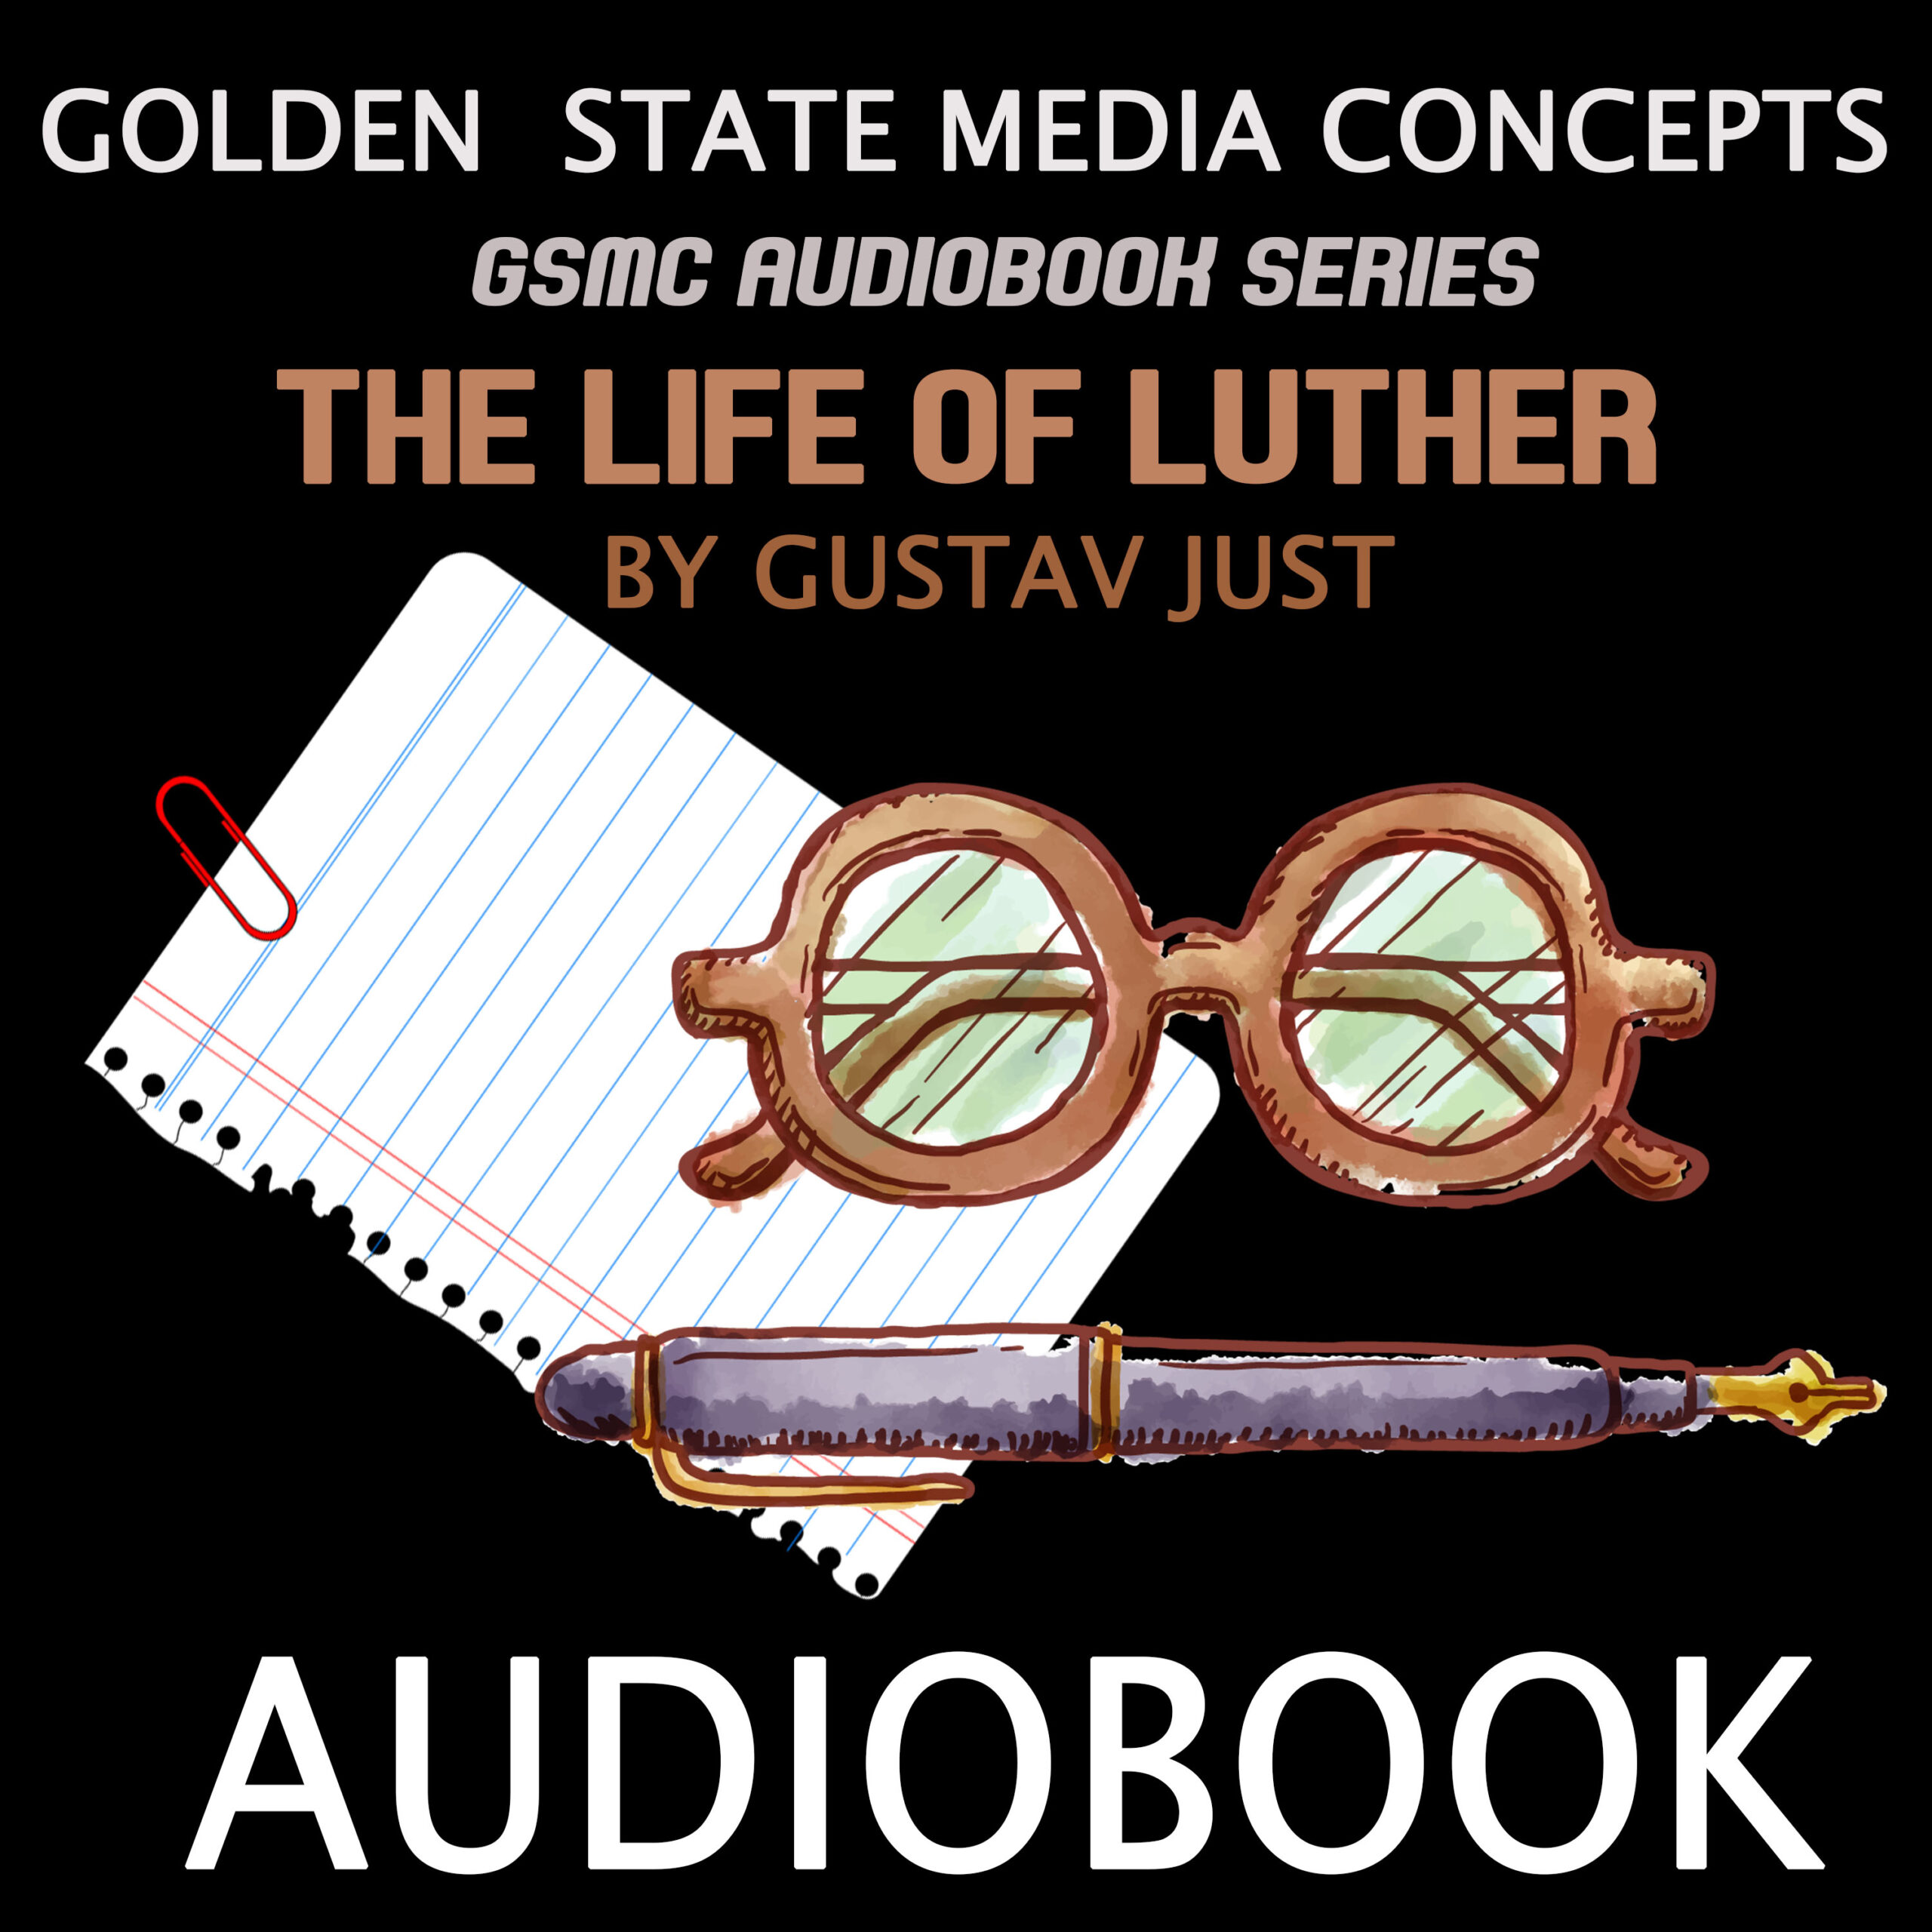 GSMC Audiobook Series: The Life of Luther by Gustav Just